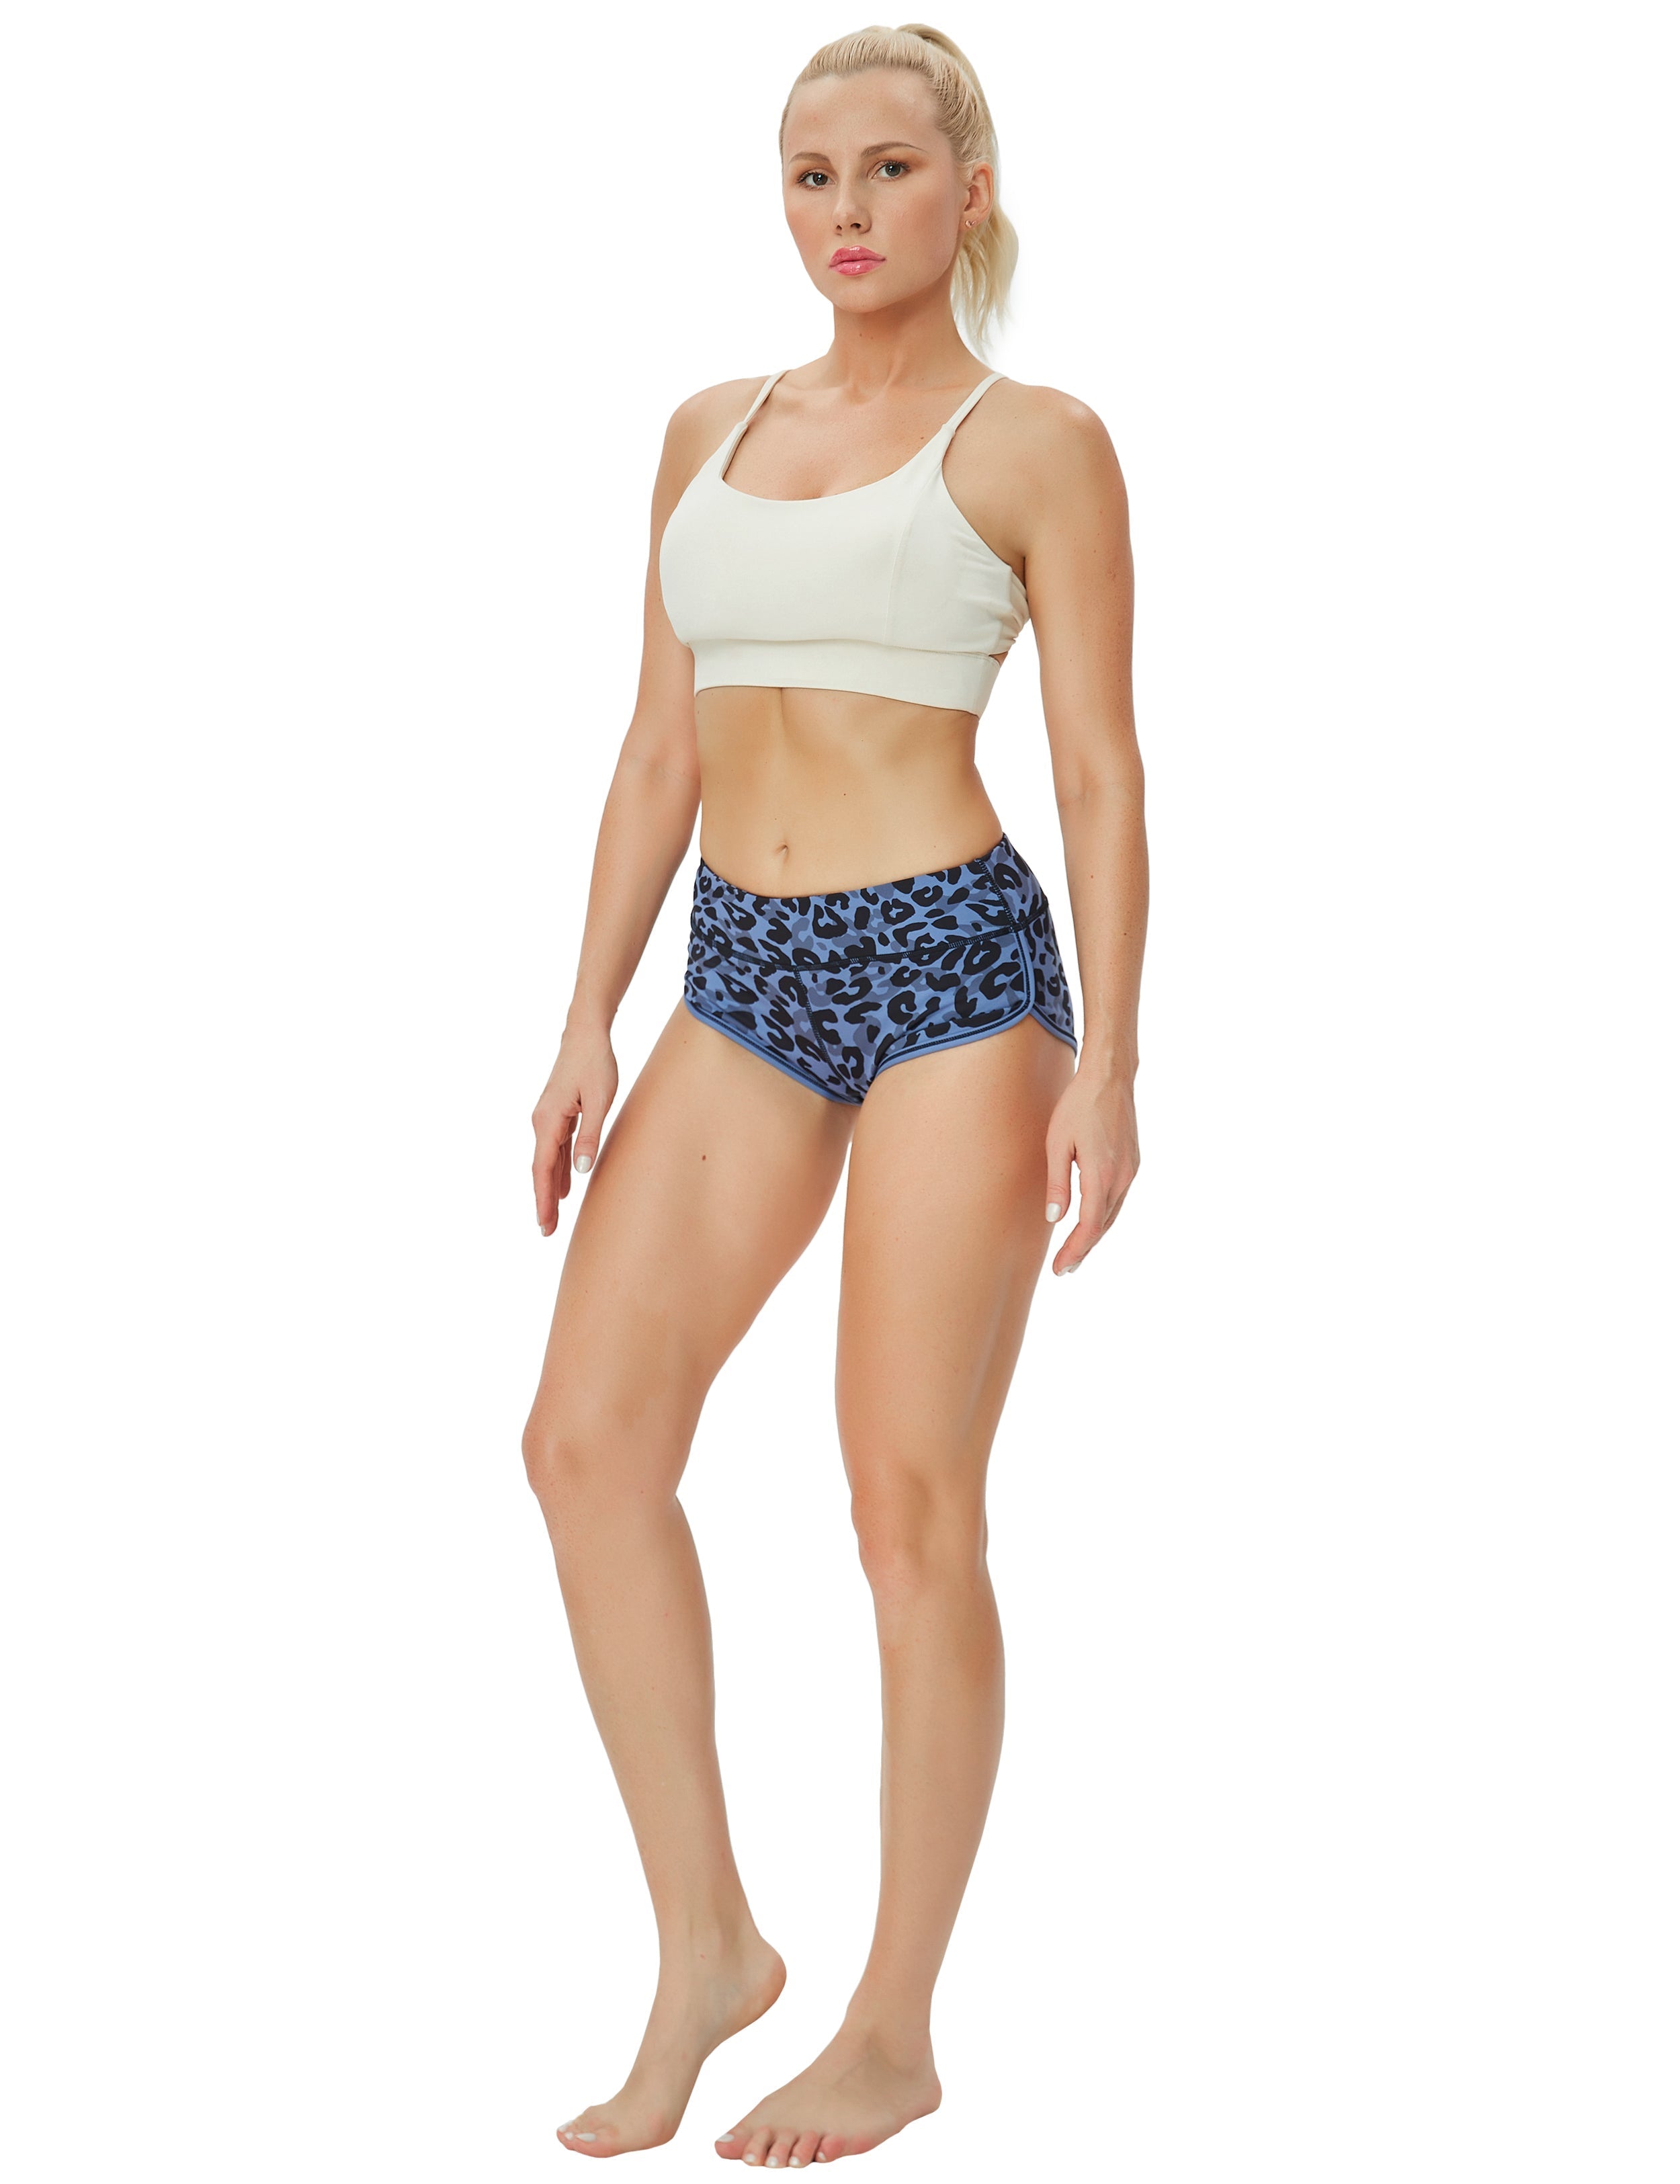 Printed Booty Plus Size Shorts navy_leopard Sleek, soft, smooth and totally comfortable: our newest sexy style is here. Softest-ever fabric High elasticity High density 4-way stretch Fabric doesn't attract lint easily No see-through Moisture-wicking Machine wash 78% Polyester, 22% Spandex